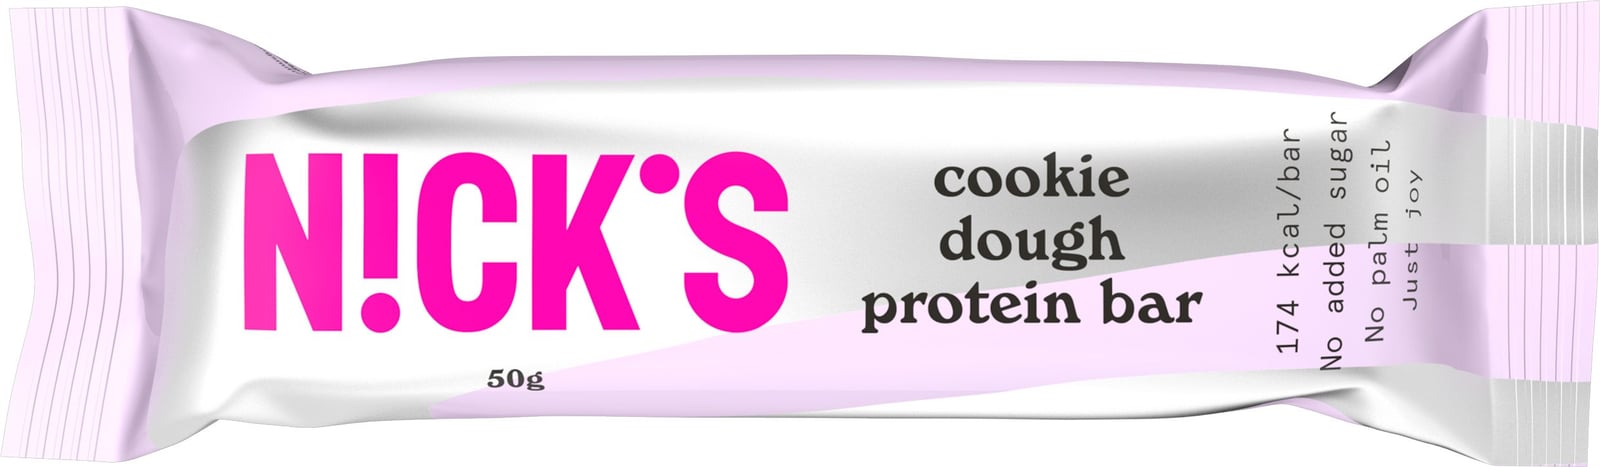 Nick's Cookie Dough Protein Bar 50 g